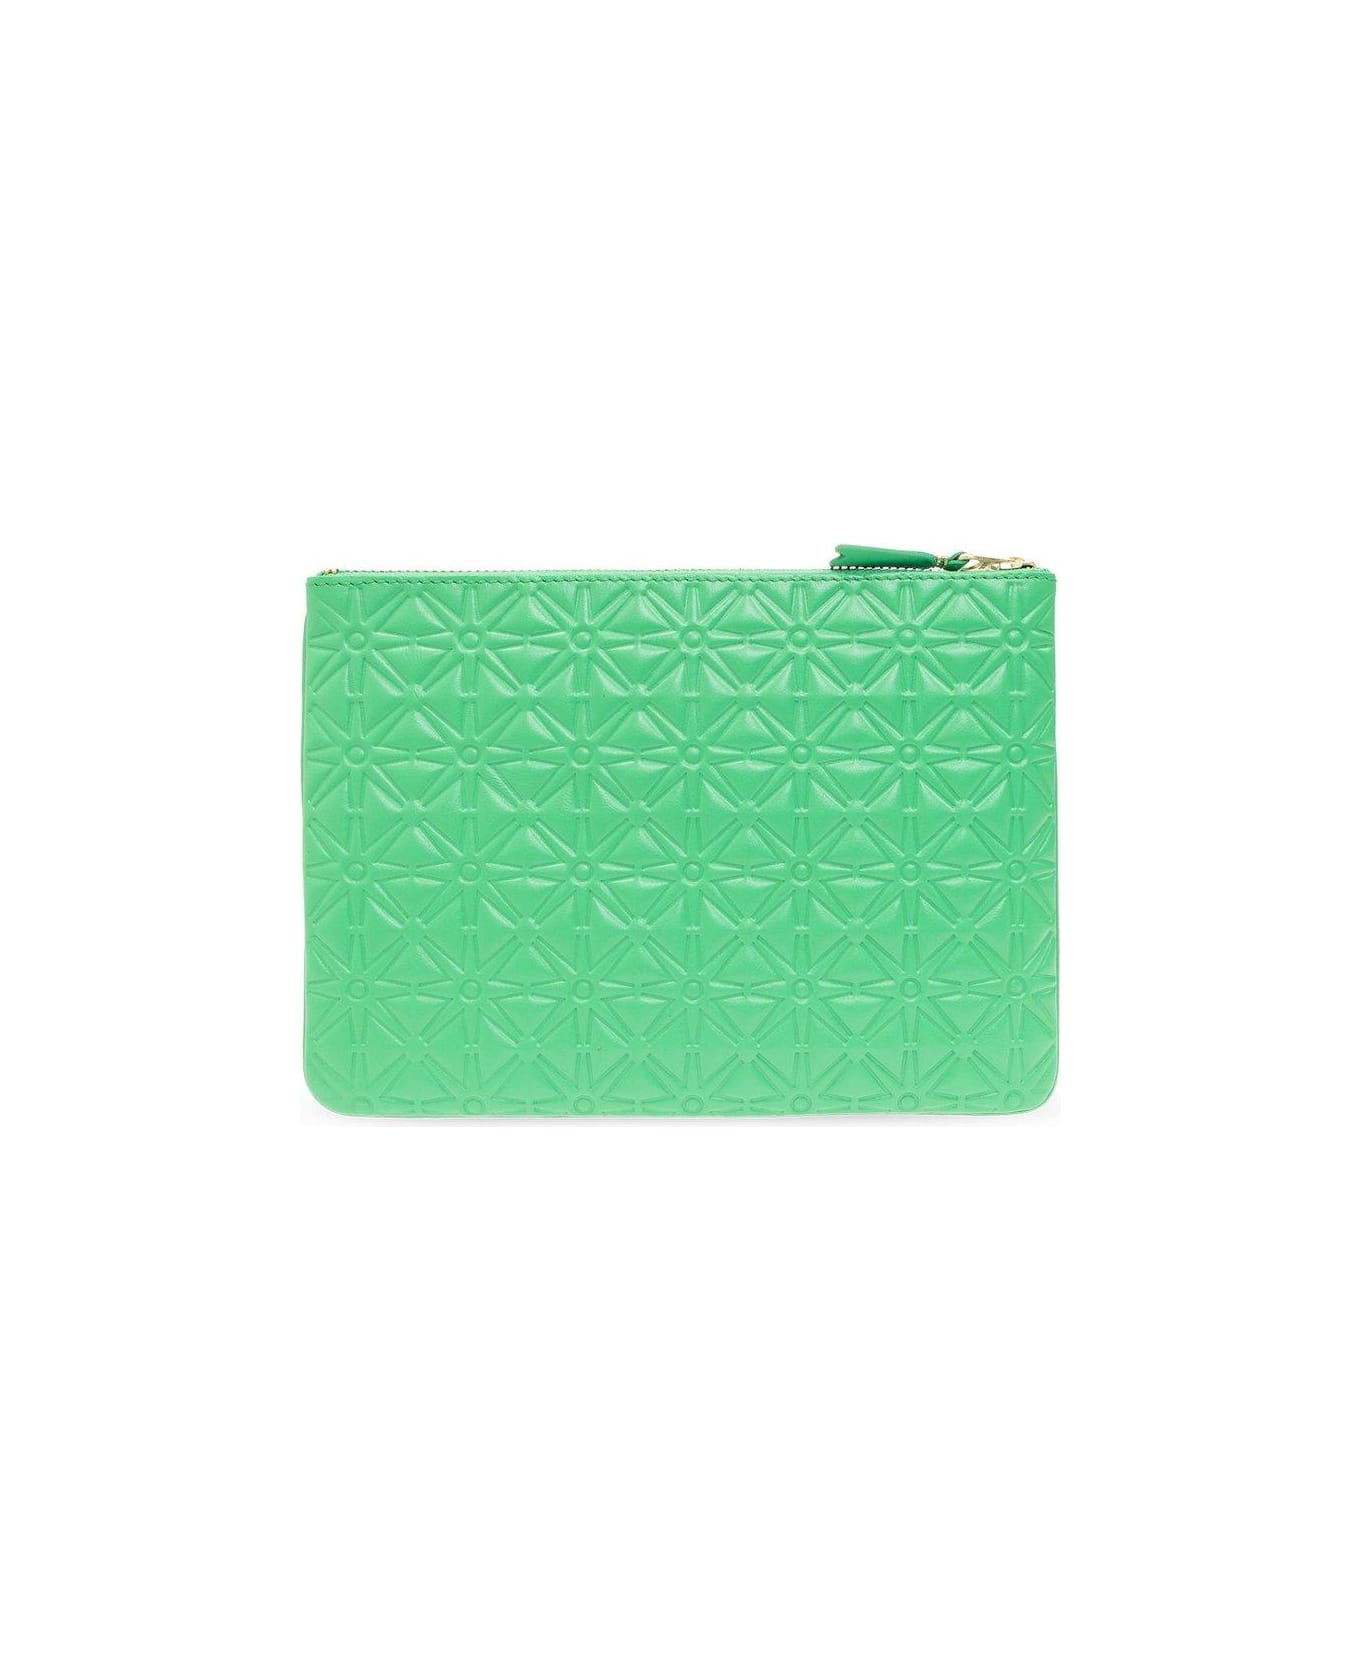 Comme des Garçons Wallet Embossed Zipped Pouch - Gree Green